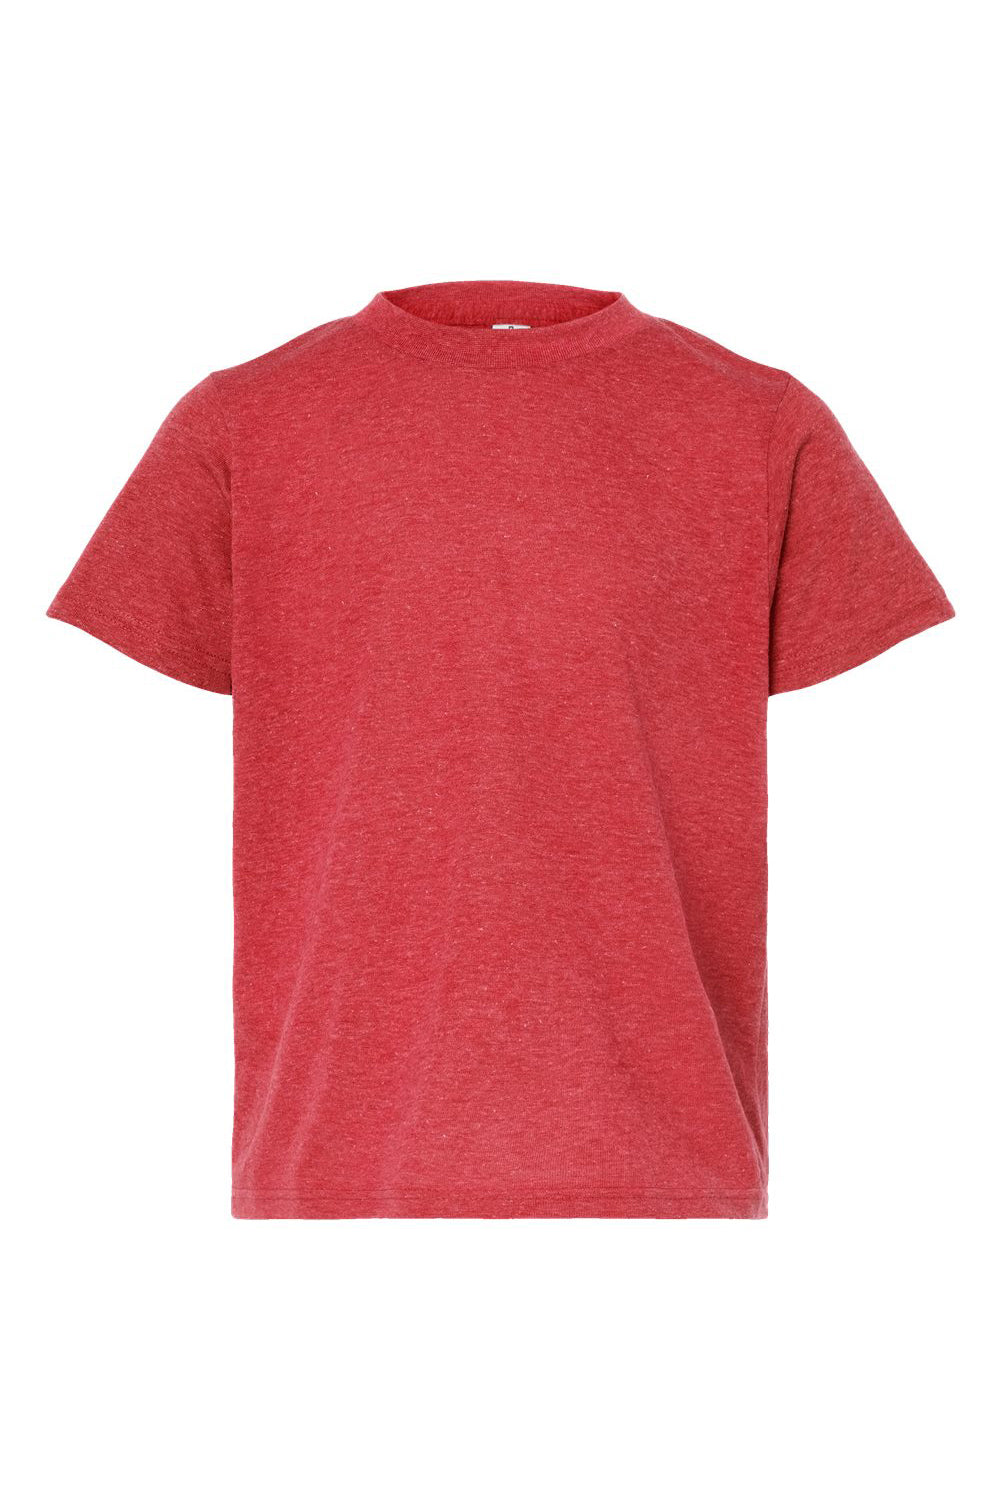 Tultex 265 Youth Poly-Rich Short Sleeve Crewneck T-Shirt Heather Red Flat Front